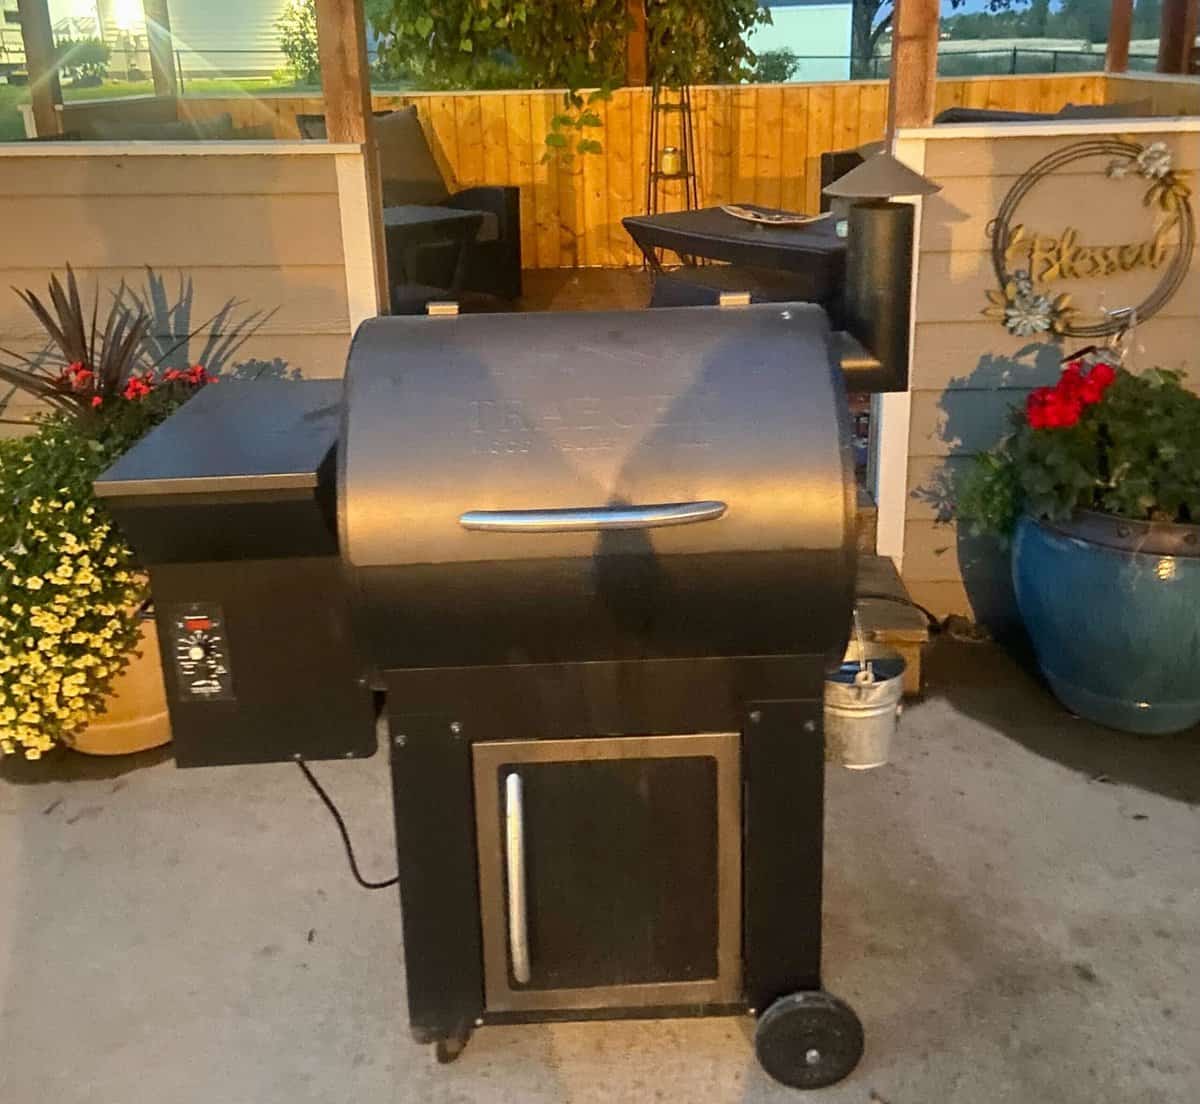 Traeger grill sitting on patio